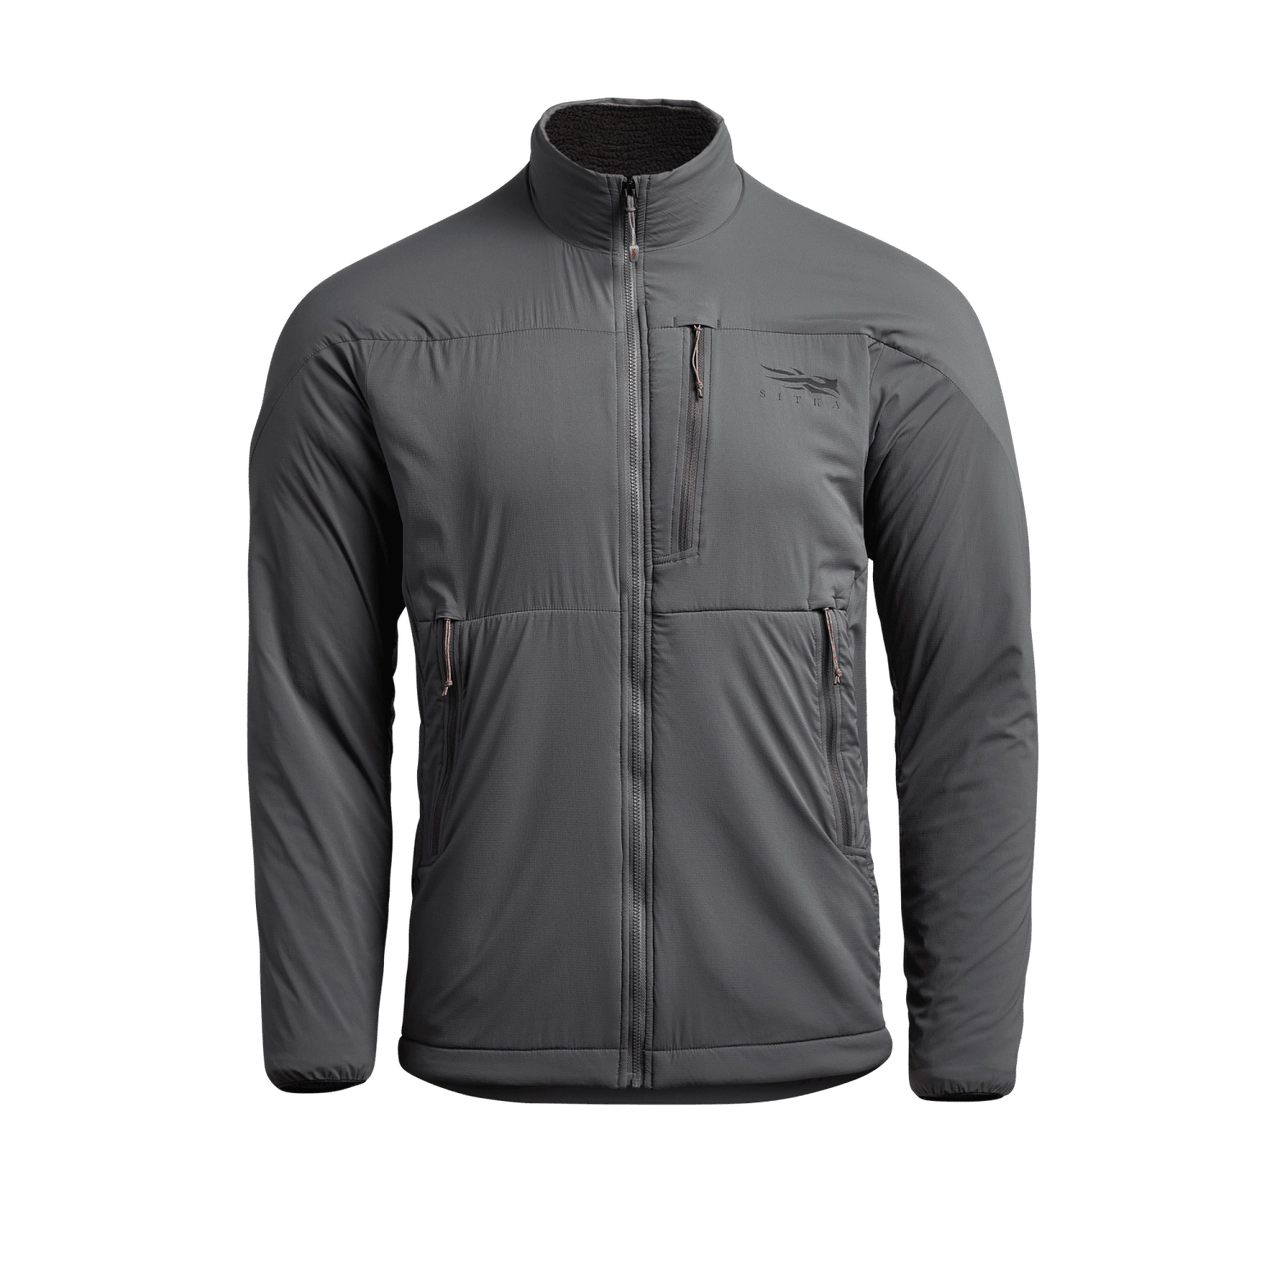 Ambient Jacket - Rivers & Glen Trading Co.